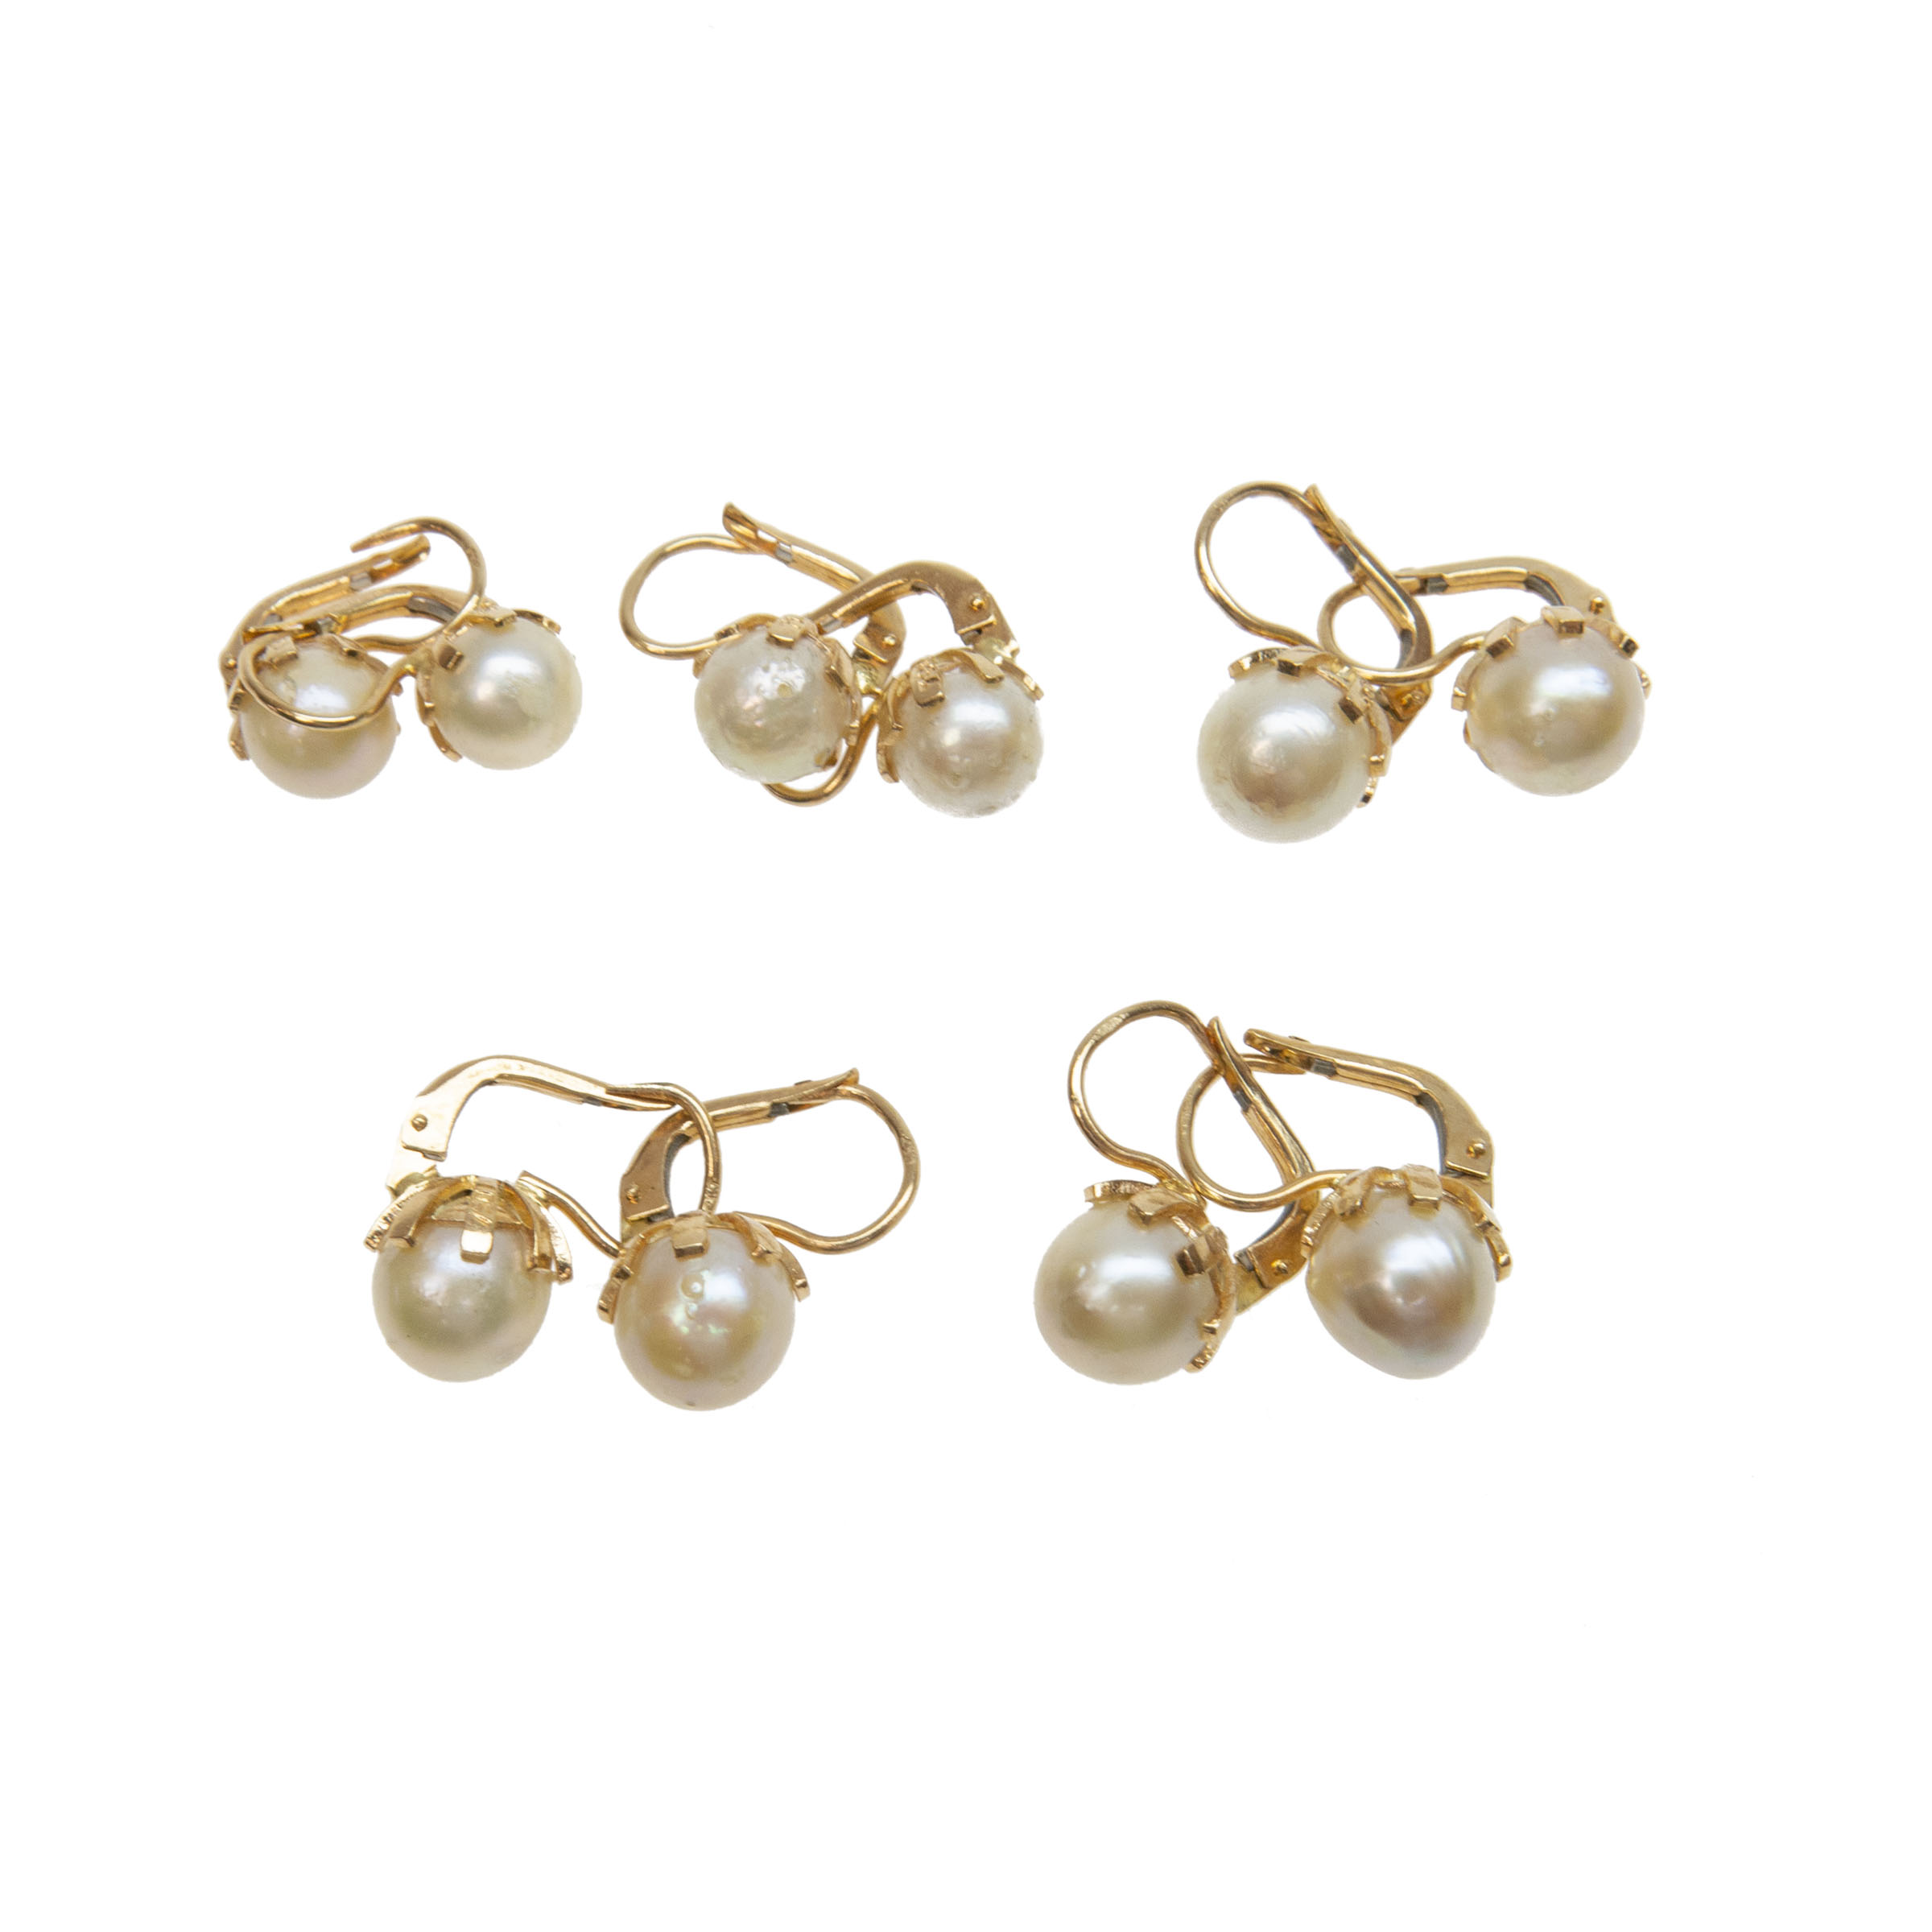 5 X Pairs Of 18K Yellow Gold Earrings